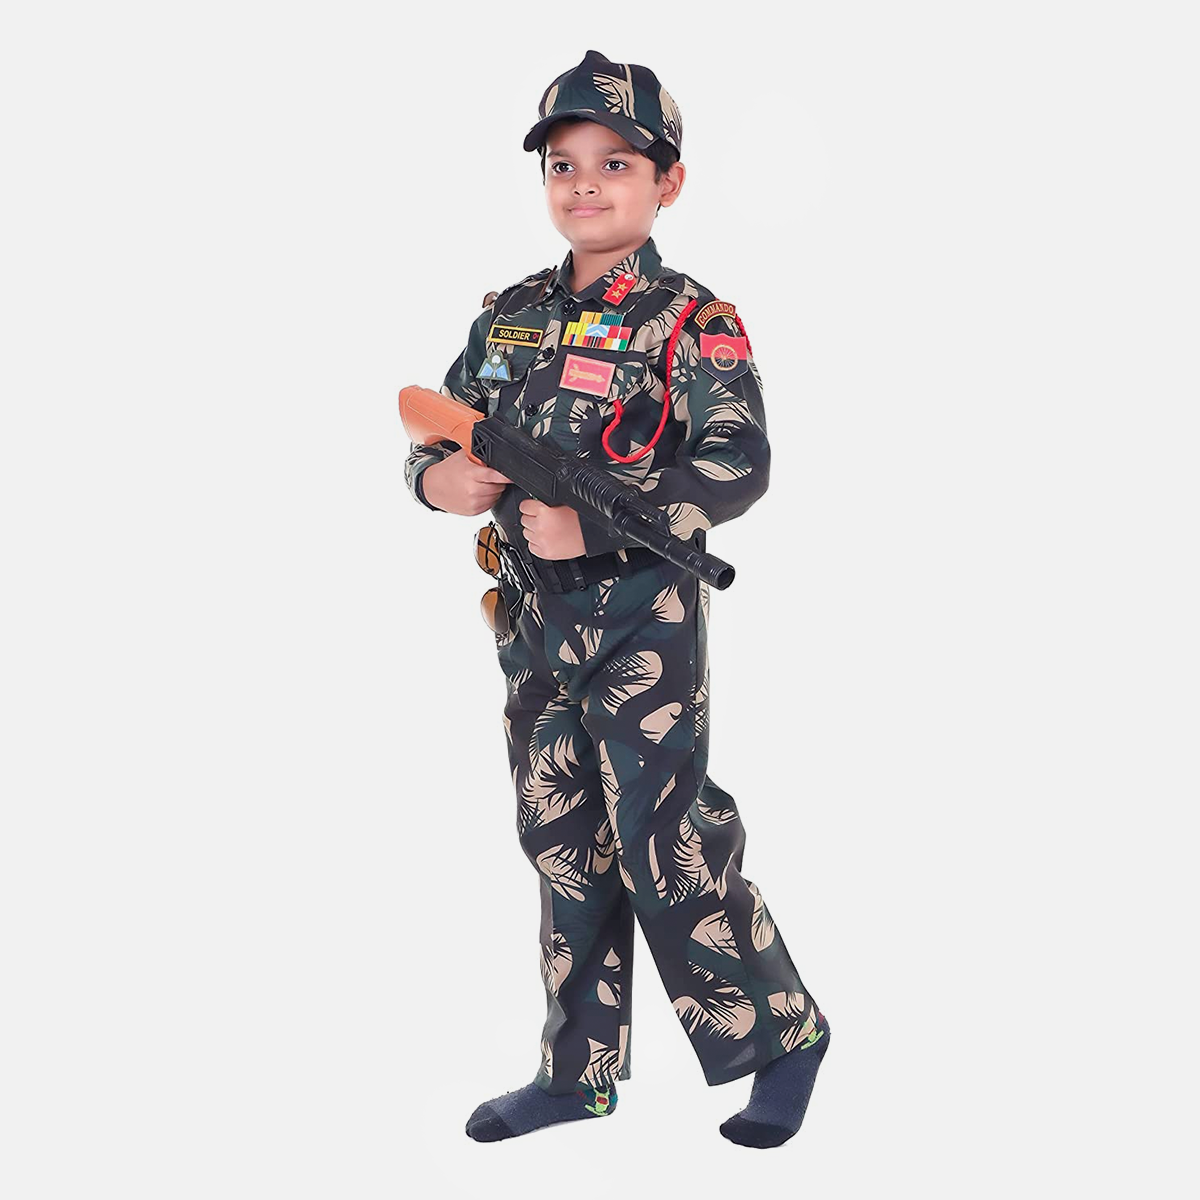 Army Dress for Kids, Jungle Print Costume for Republic Day, pecial Badges, Cap, Lanyard, 3Y